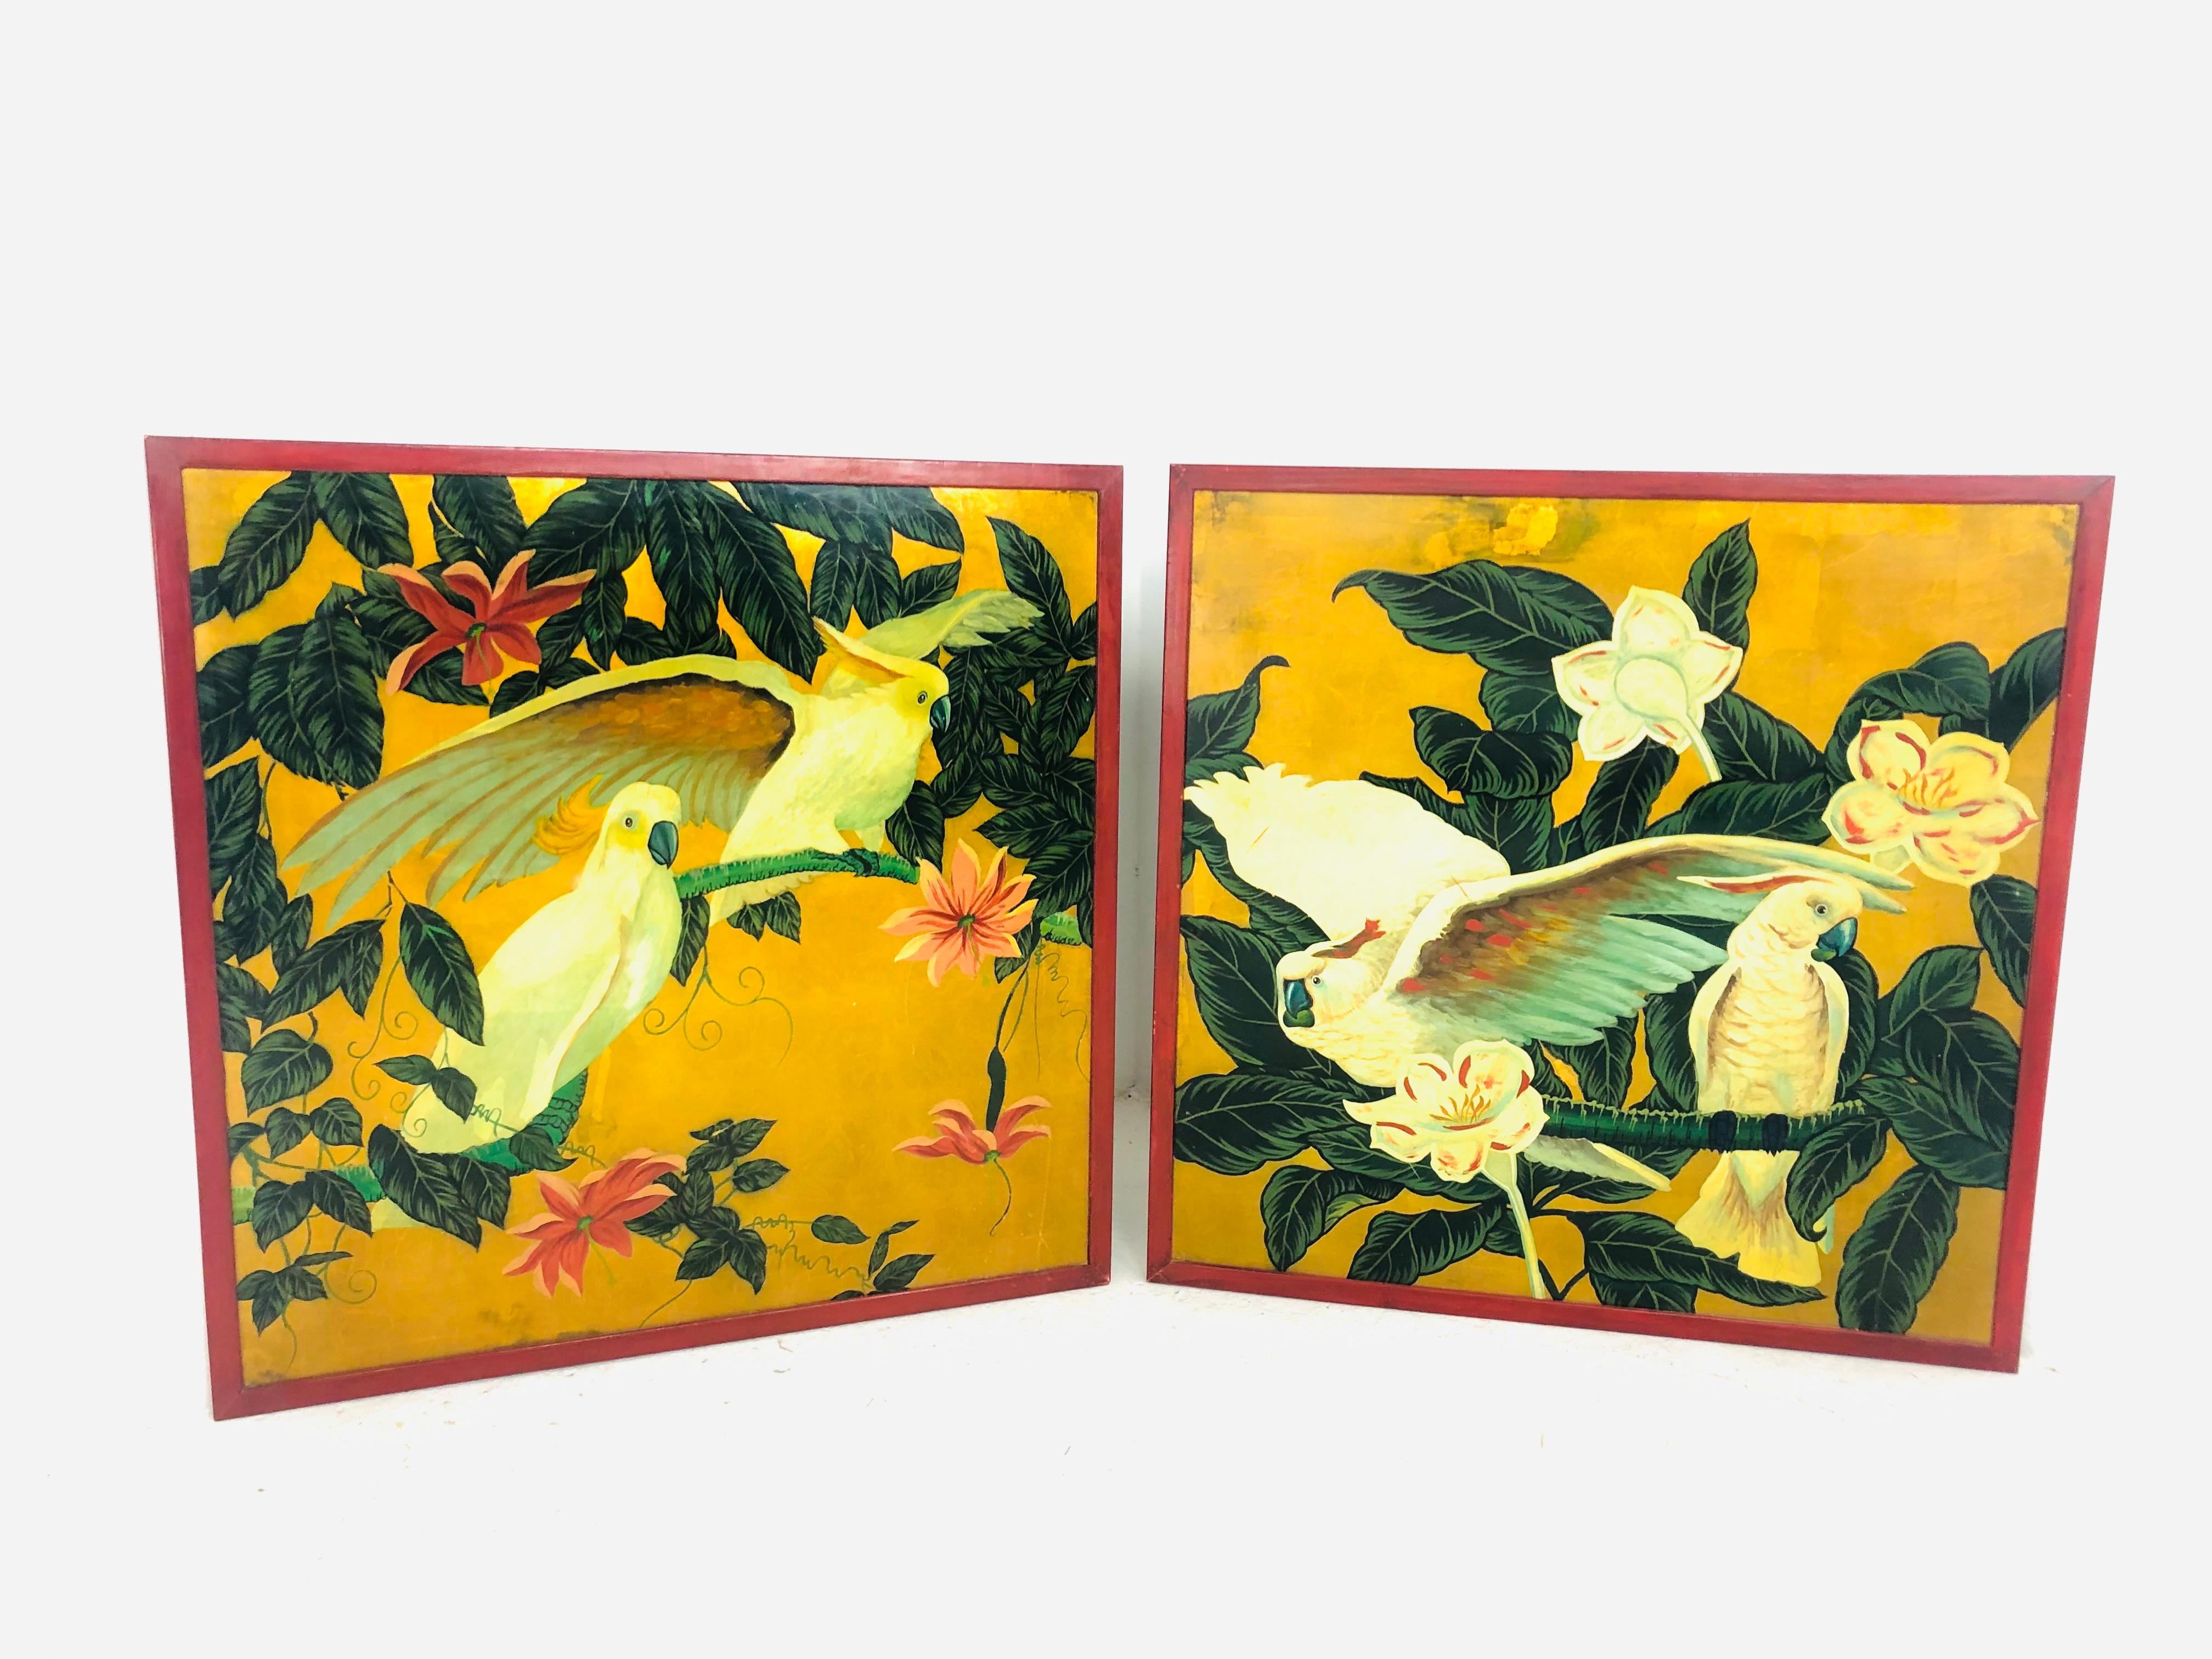 Gorgeous pair of large vintage Cockatoo paintings on wood. Red lacquer frames. Good condition but one has a clear shiny finish while the other is clear matte.